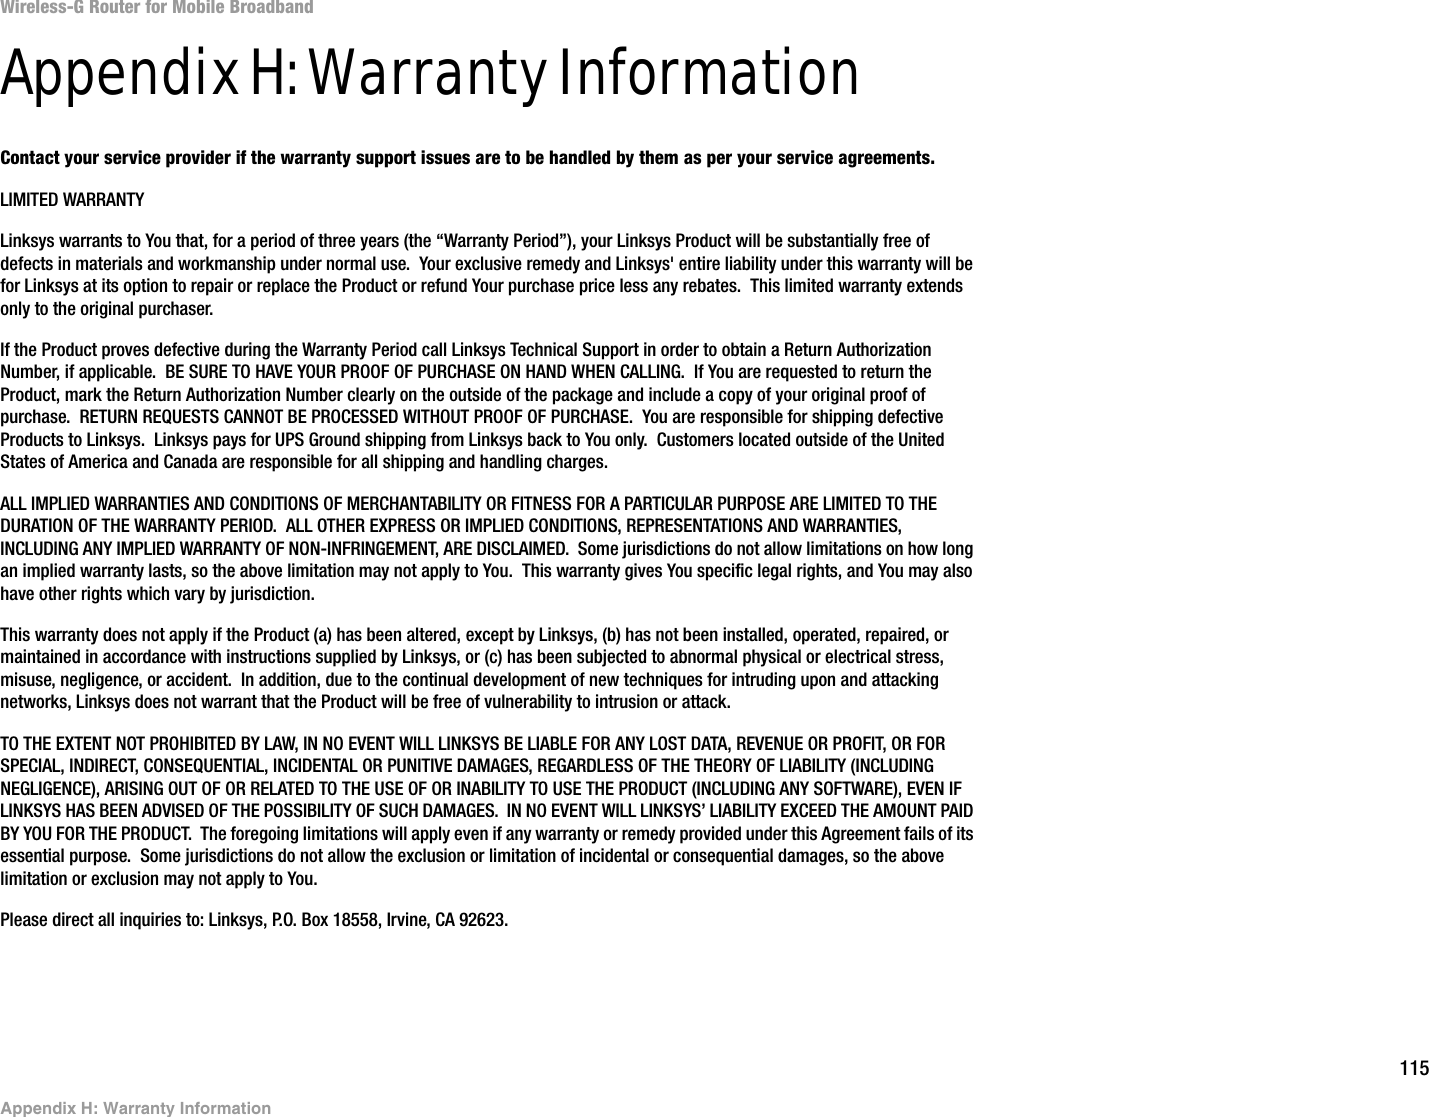 115Appendix H: Warranty InformationWireless-G Router for Mobile BroadbandAppendix H: Warranty InformationContact your service provider if the warranty support issues are to be handled by them as per your service agreements.LIMITED WARRANTYLinksys warrants to You that, for a period of three years (the “Warranty Period”), your Linksys Product will be substantially free of defects in materials and workmanship under normal use.  Your exclusive remedy and Linksys&apos; entire liability under this warranty will be for Linksys at its option to repair or replace the Product or refund Your purchase price less any rebates.  This limited warranty extends only to the original purchaser.  If the Product proves defective during the Warranty Period call Linksys Technical Support in order to obtain a Return Authorization Number, if applicable.  BE SURE TO HAVE YOUR PROOF OF PURCHASE ON HAND WHEN CALLING.  If You are requested to return the Product, mark the Return Authorization Number clearly on the outside of the package and include a copy of your original proof of purchase.  RETURN REQUESTS CANNOT BE PROCESSED WITHOUT PROOF OF PURCHASE.  You are responsible for shipping defective Products to Linksys.  Linksys pays for UPS Ground shipping from Linksys back to You only.  Customers located outside of the United States of America and Canada are responsible for all shipping and handling charges.ALL IMPLIED WARRANTIES AND CONDITIONS OF MERCHANTABILITY OR FITNESS FOR A PARTICULAR PURPOSE ARE LIMITED TO THE DURATION OF THE WARRANTY PERIOD.  ALL OTHER EXPRESS OR IMPLIED CONDITIONS, REPRESENTATIONS AND WARRANTIES, INCLUDING ANY IMPLIED WARRANTY OF NON-INFRINGEMENT, ARE DISCLAIMED.  Some jurisdictions do not allow limitations on how long an implied warranty lasts, so the above limitation may not apply to You.  This warranty gives You specific legal rights, and You may also have other rights which vary by jurisdiction.This warranty does not apply if the Product (a) has been altered, except by Linksys, (b) has not been installed, operated, repaired, or maintained in accordance with instructions supplied by Linksys, or (c) has been subjected to abnormal physical or electrical stress, misuse, negligence, or accident.  In addition, due to the continual development of new techniques for intruding upon and attacking networks, Linksys does not warrant that the Product will be free of vulnerability to intrusion or attack.TO THE EXTENT NOT PROHIBITED BY LAW, IN NO EVENT WILL LINKSYS BE LIABLE FOR ANY LOST DATA, REVENUE OR PROFIT, OR FOR SPECIAL, INDIRECT, CONSEQUENTIAL, INCIDENTAL OR PUNITIVE DAMAGES, REGARDLESS OF THE THEORY OF LIABILITY (INCLUDING NEGLIGENCE), ARISING OUT OF OR RELATED TO THE USE OF OR INABILITY TO USE THE PRODUCT (INCLUDING ANY SOFTWARE), EVEN IF LINKSYS HAS BEEN ADVISED OF THE POSSIBILITY OF SUCH DAMAGES.  IN NO EVENT WILL LINKSYS’ LIABILITY EXCEED THE AMOUNT PAID BY YOU FOR THE PRODUCT.  The foregoing limitations will apply even if any warranty or remedy provided under this Agreement fails of its essential purpose.  Some jurisdictions do not allow the exclusion or limitation of incidental or consequential damages, so the above limitation or exclusion may not apply to You.Please direct all inquiries to: Linksys, P.O. Box 18558, Irvine, CA 92623.